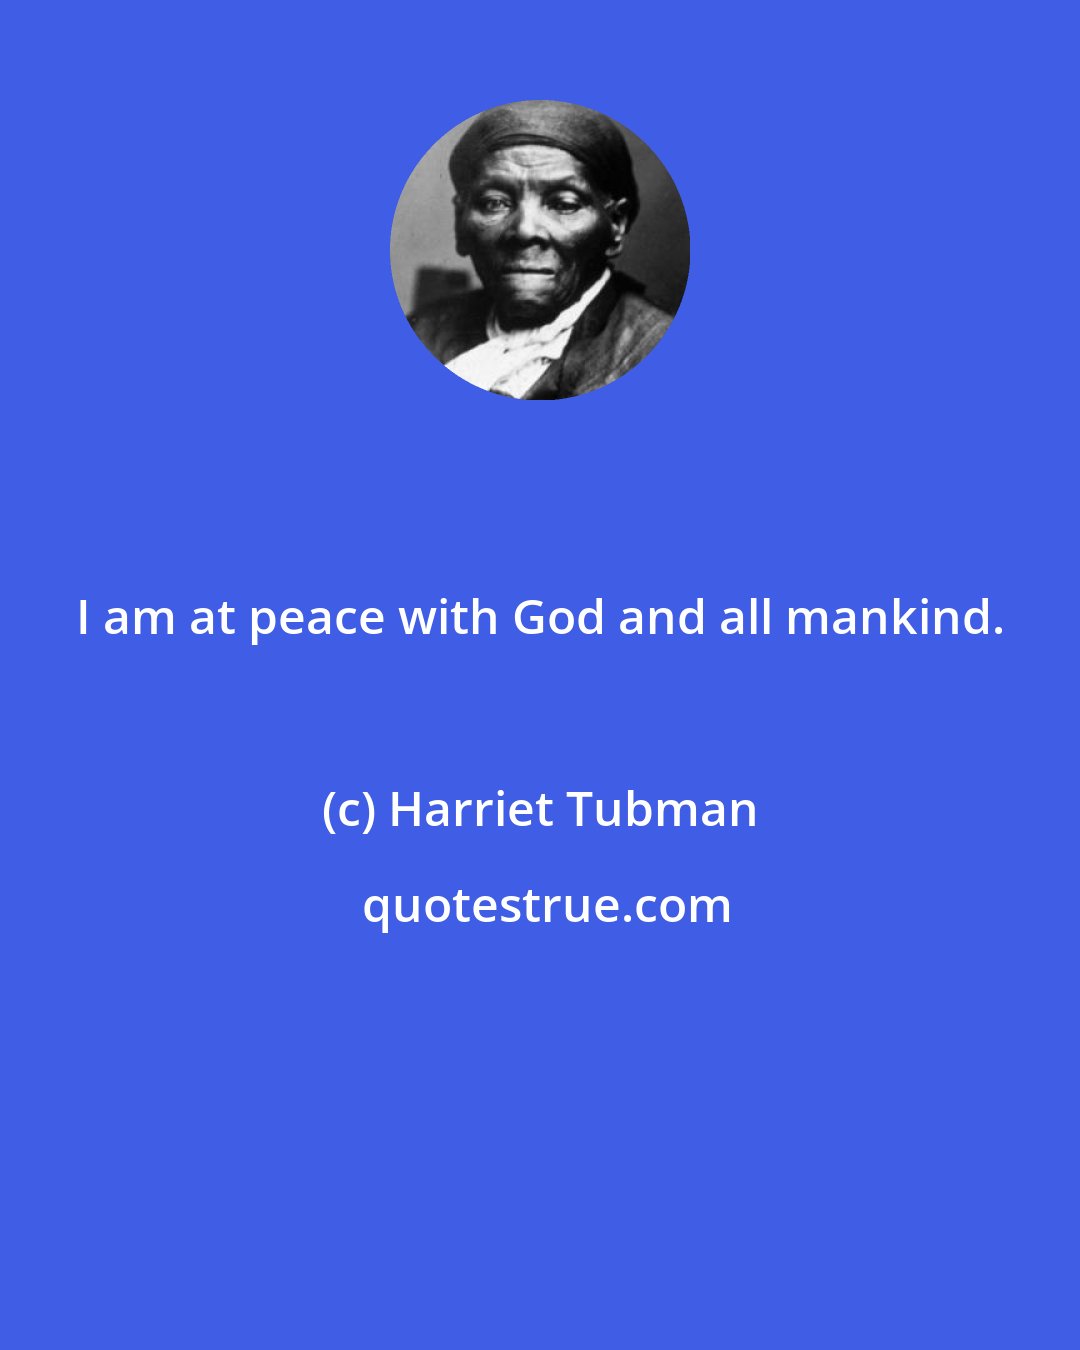 Harriet Tubman: I am at peace with God and all mankind.